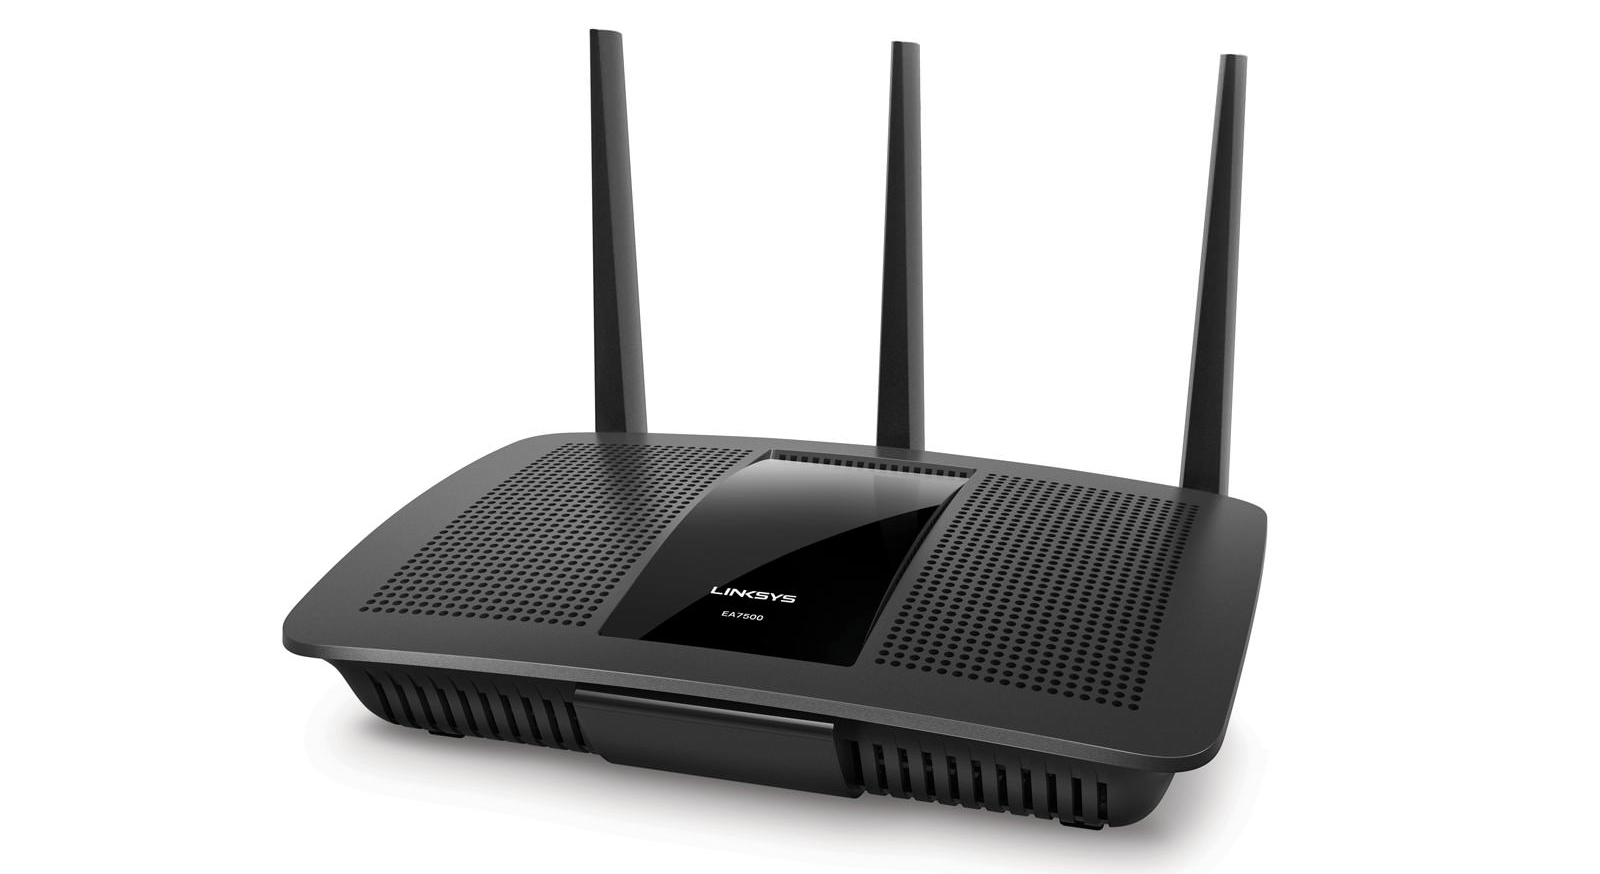 Linksys EA7500 Wireless Router Review